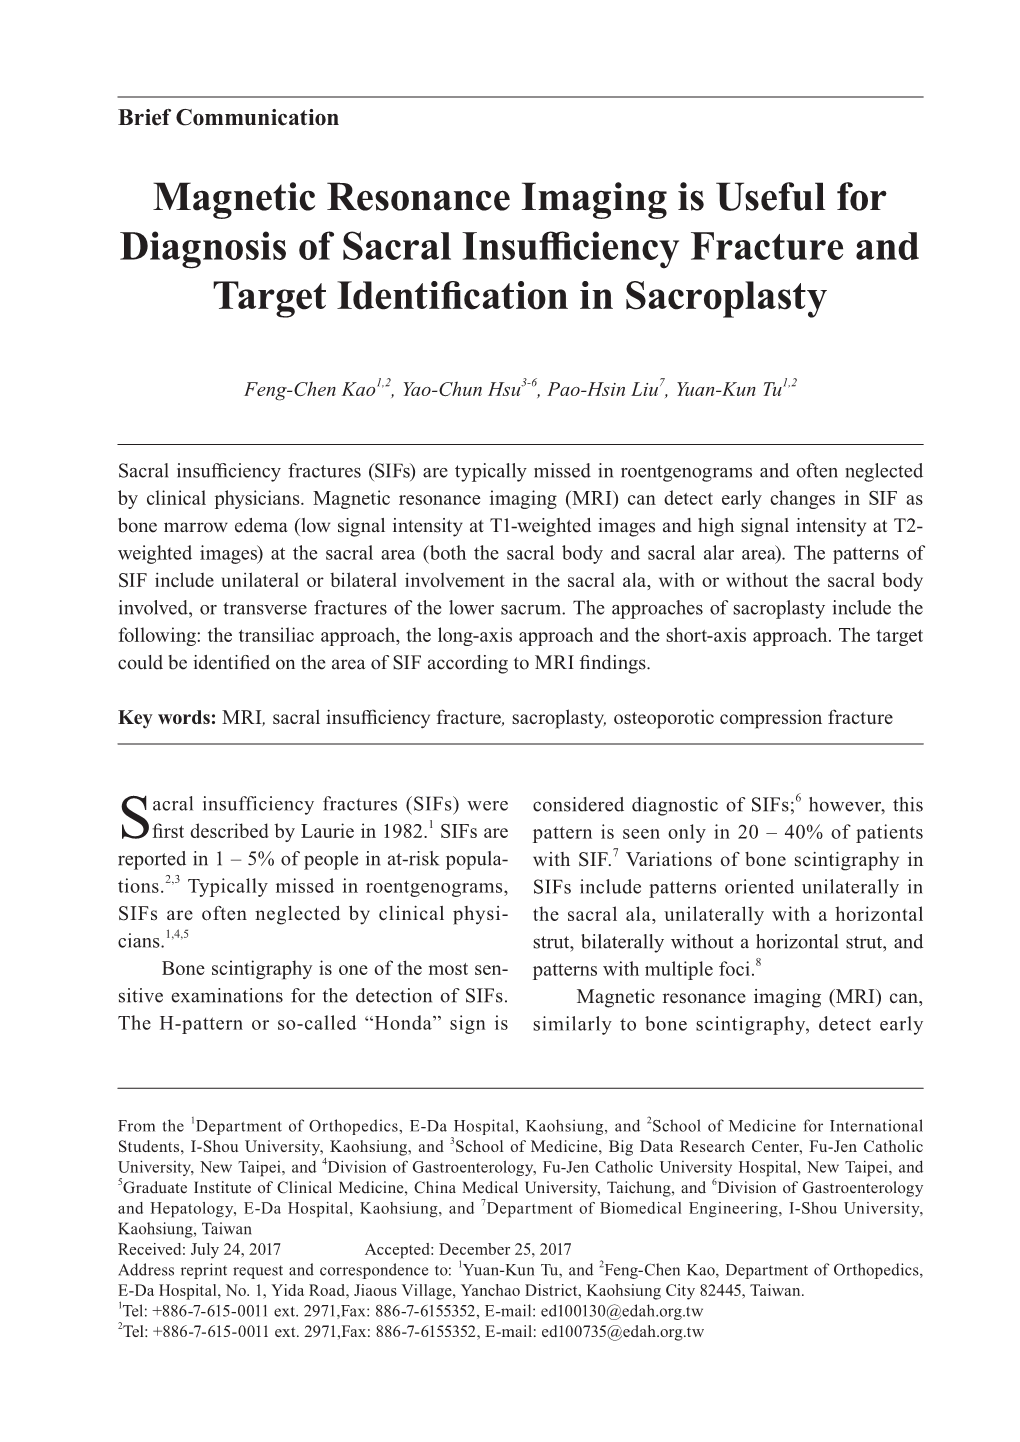 Magnetic Resonance Imaging Is Useful for Diagnosis of Sacral Insufficiency Fracture and Target Identification in Sacroplasty